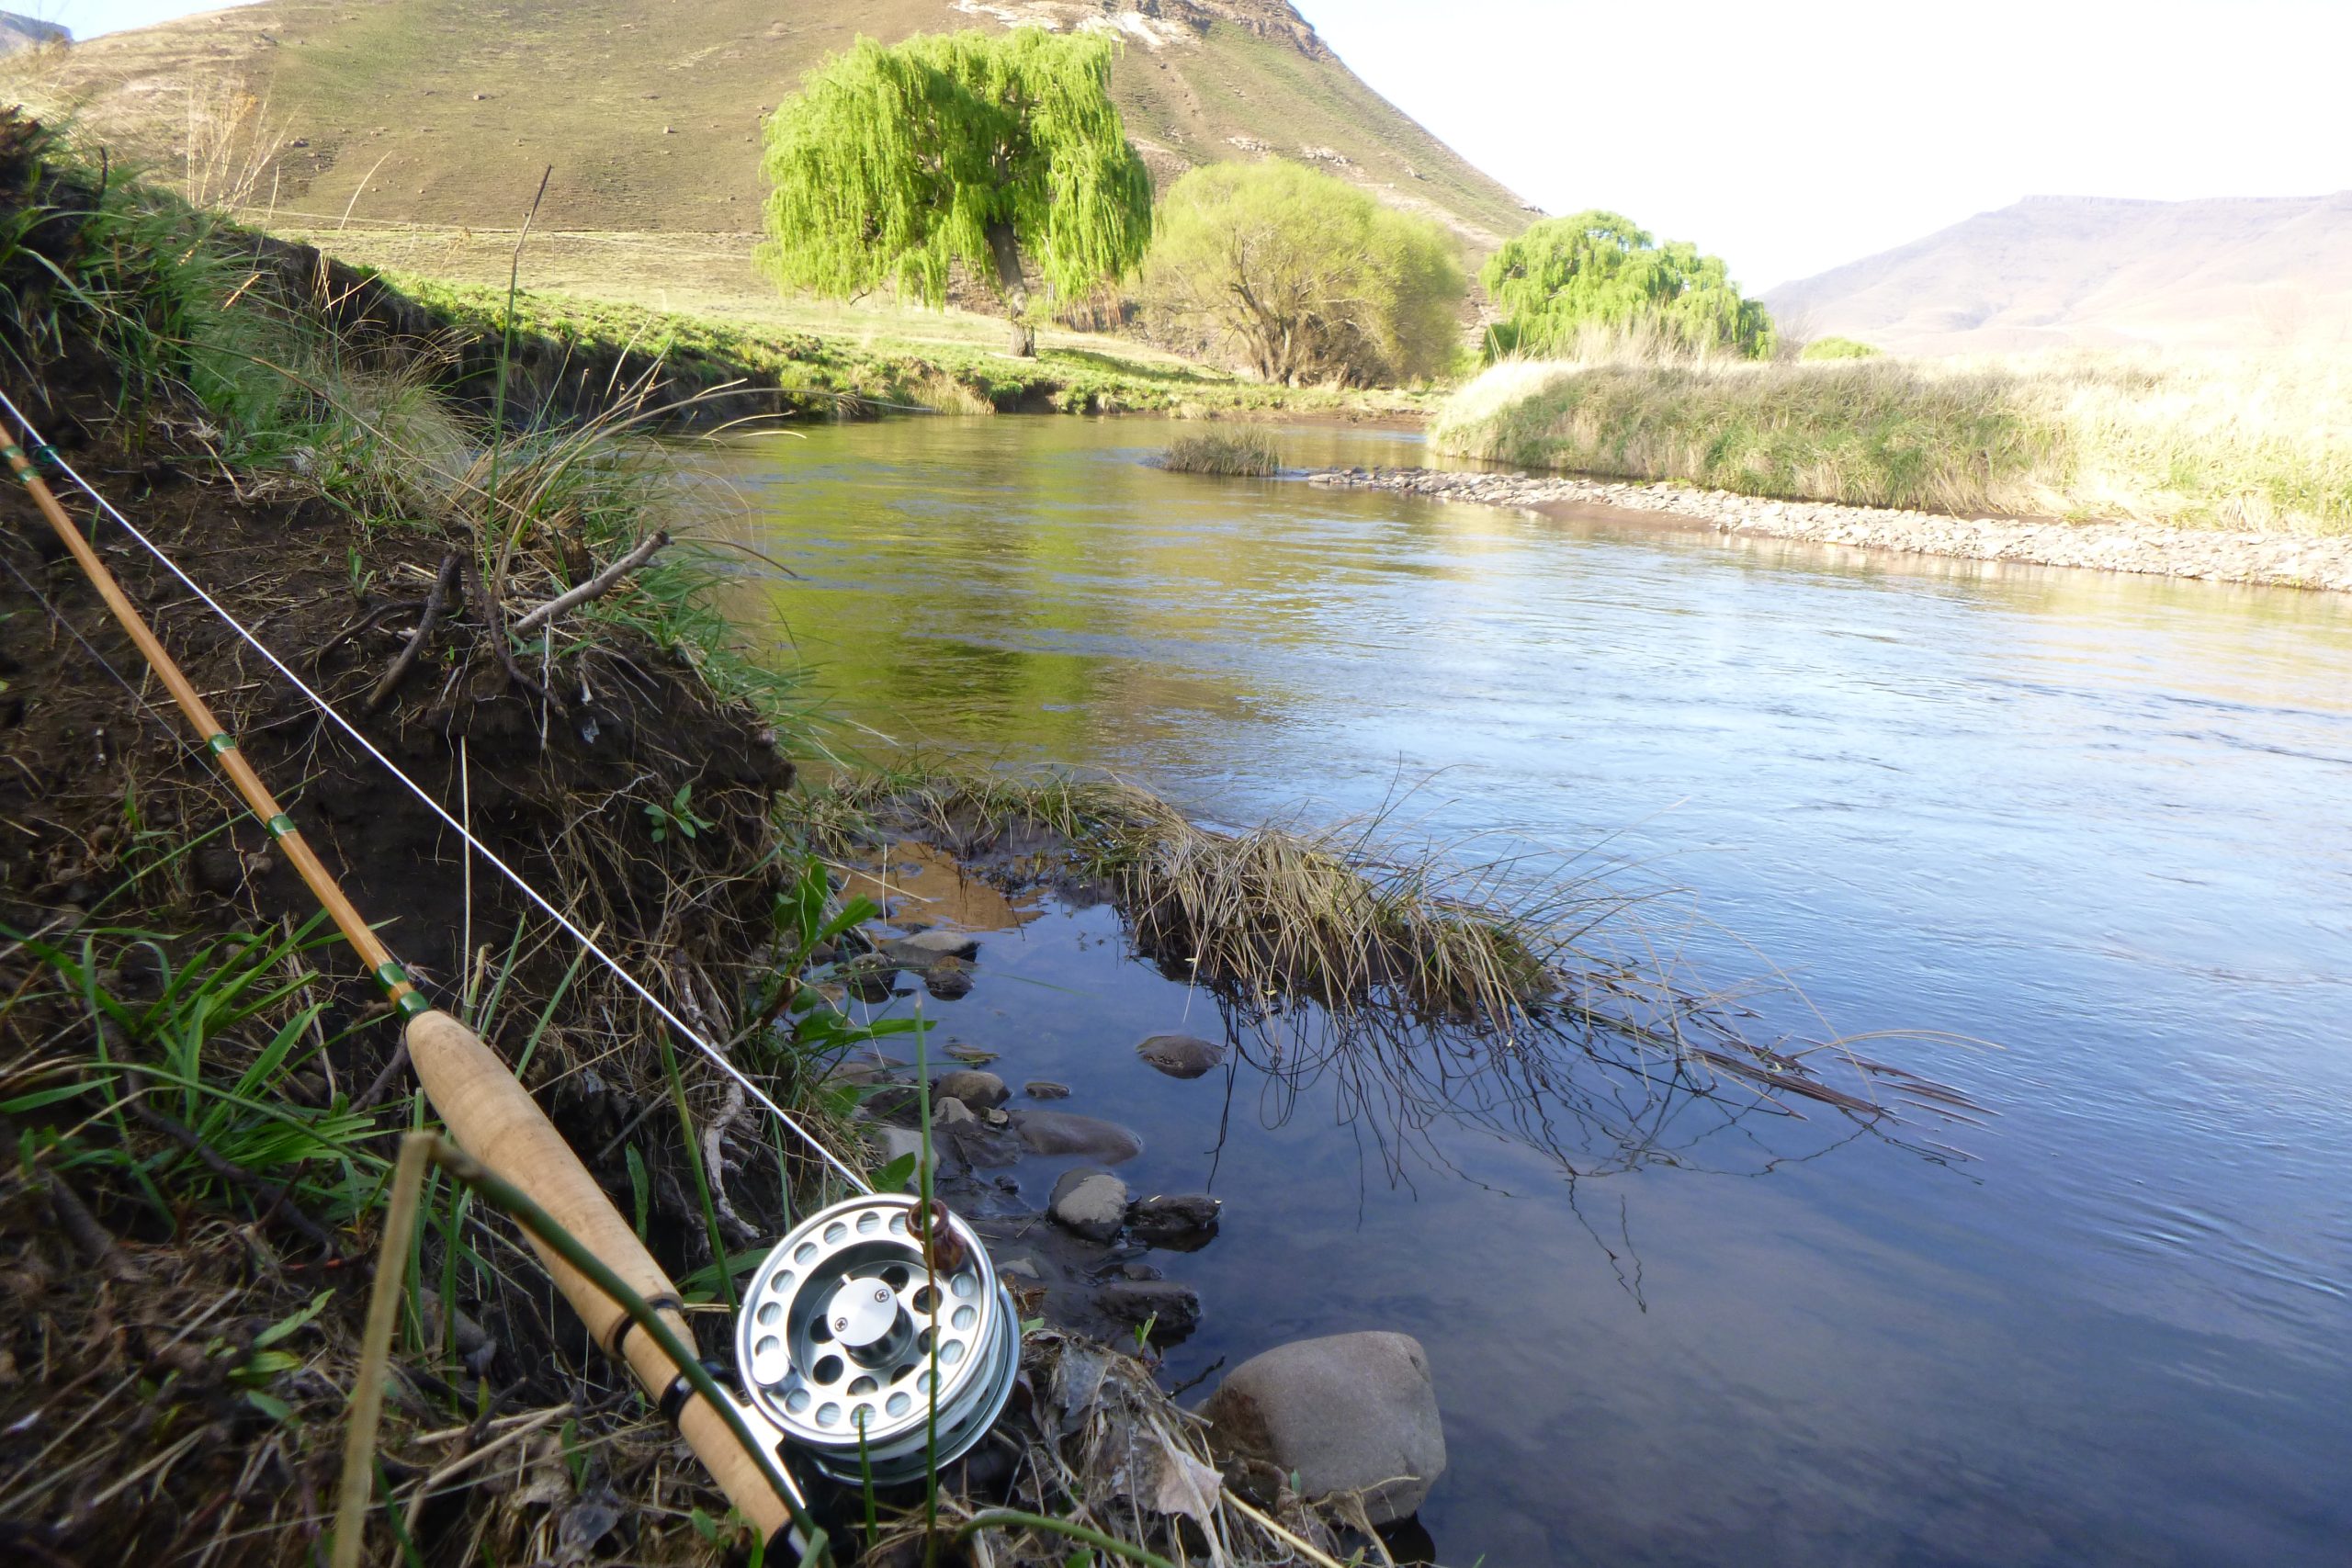 fly fishing cape streams Archives